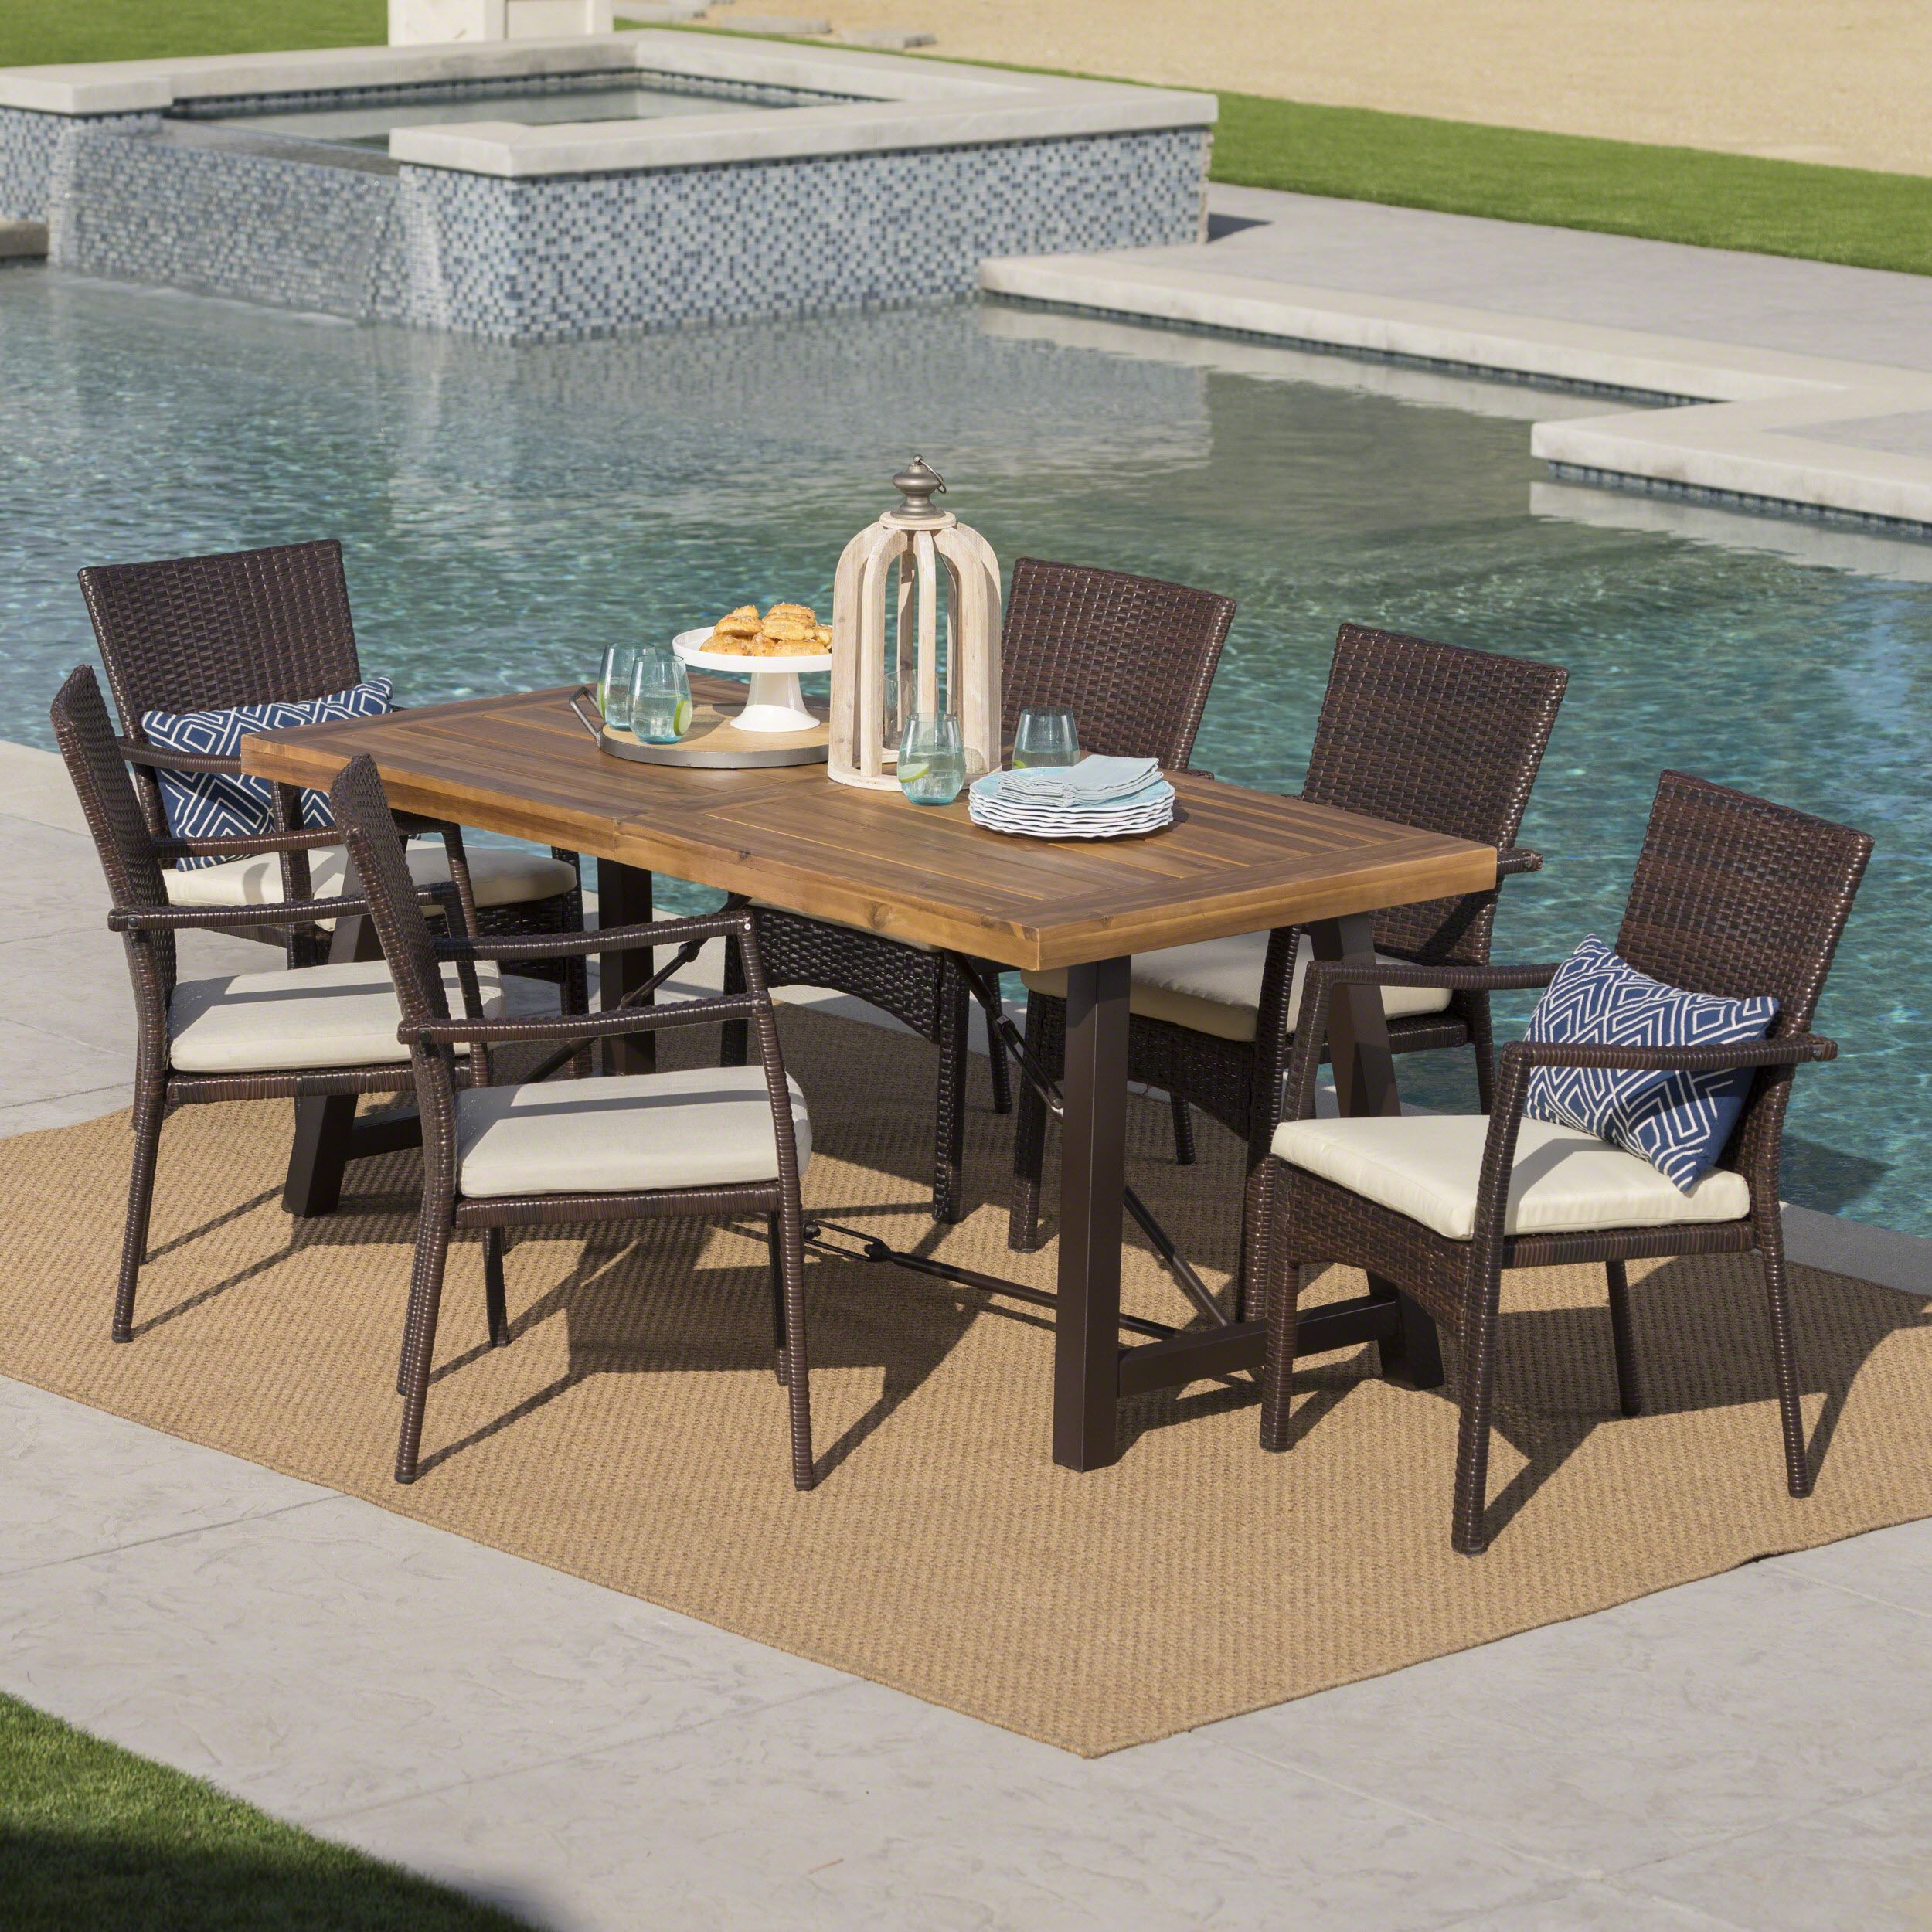 Landon Outdoor 7 Piece Dining Set With Teak Finished Wood Table And Intended For 7 Pieces Teak Outdoor Dining Sets (View 1 of 15)